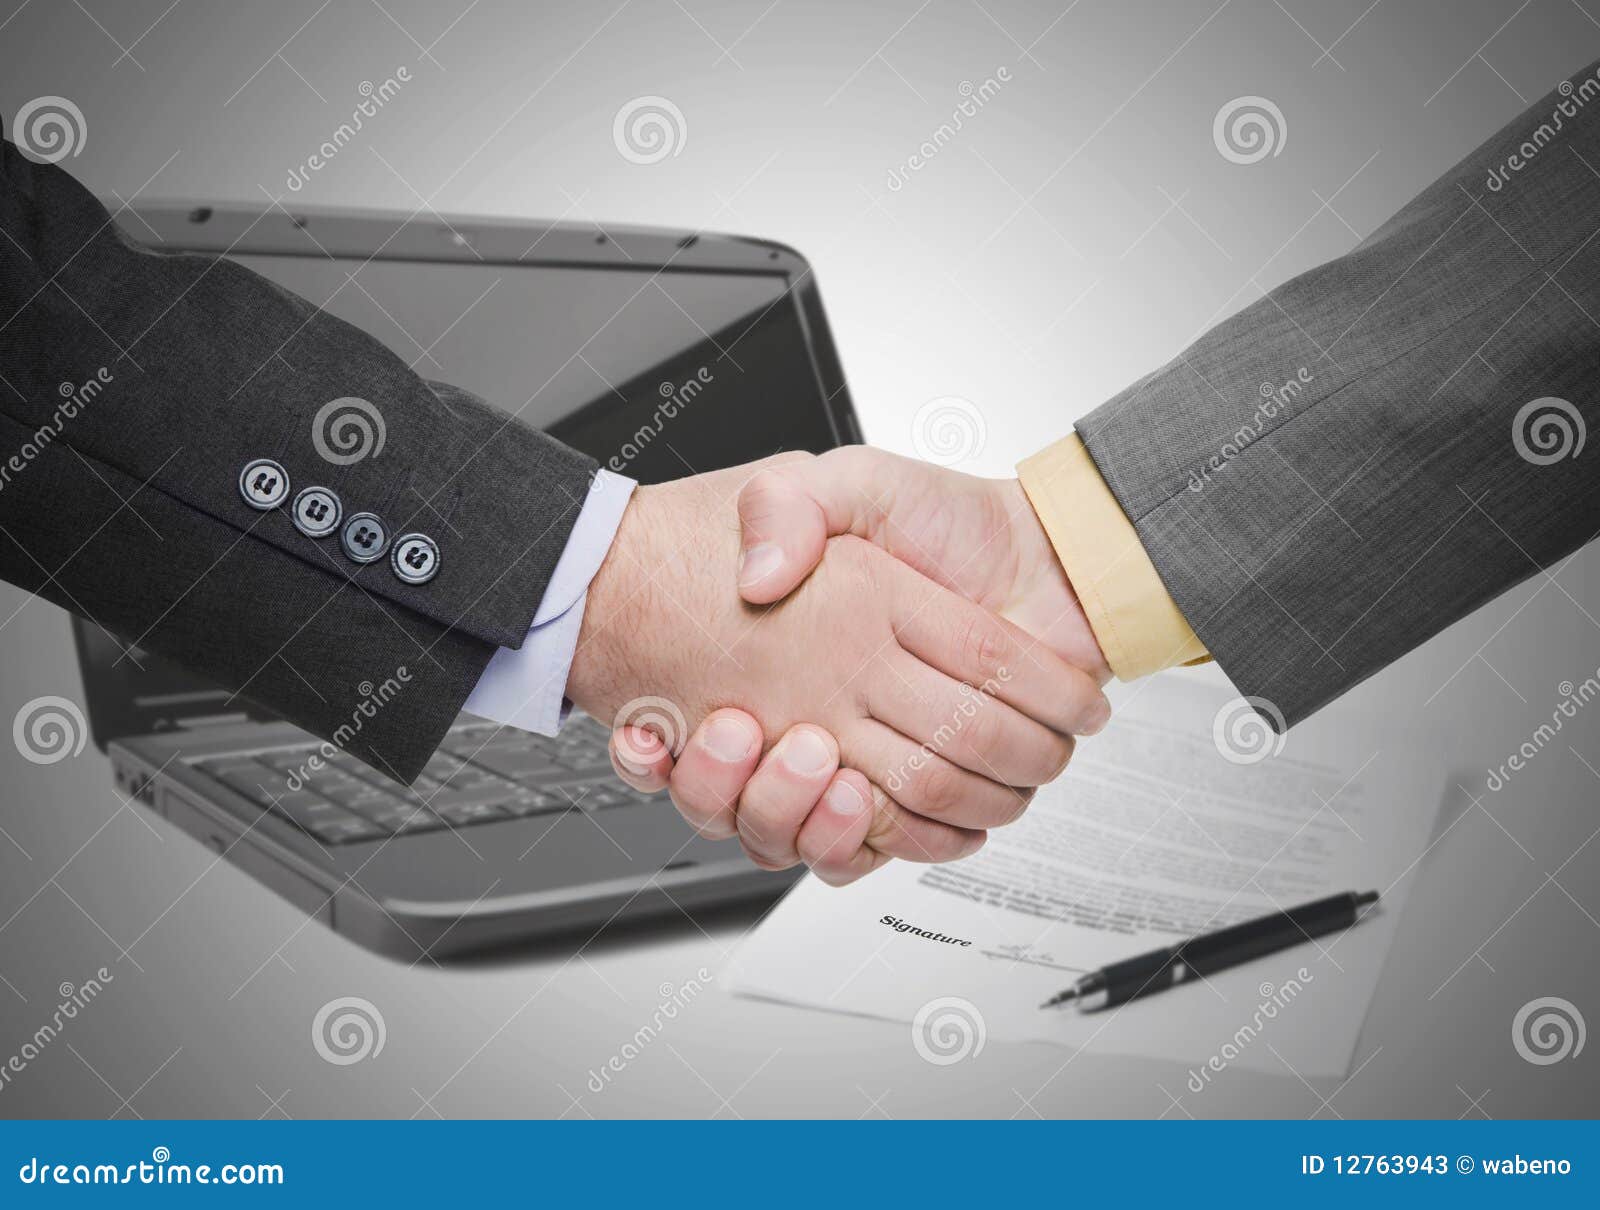  done stock image. Image of deal, company, firm, notebook - 12763943